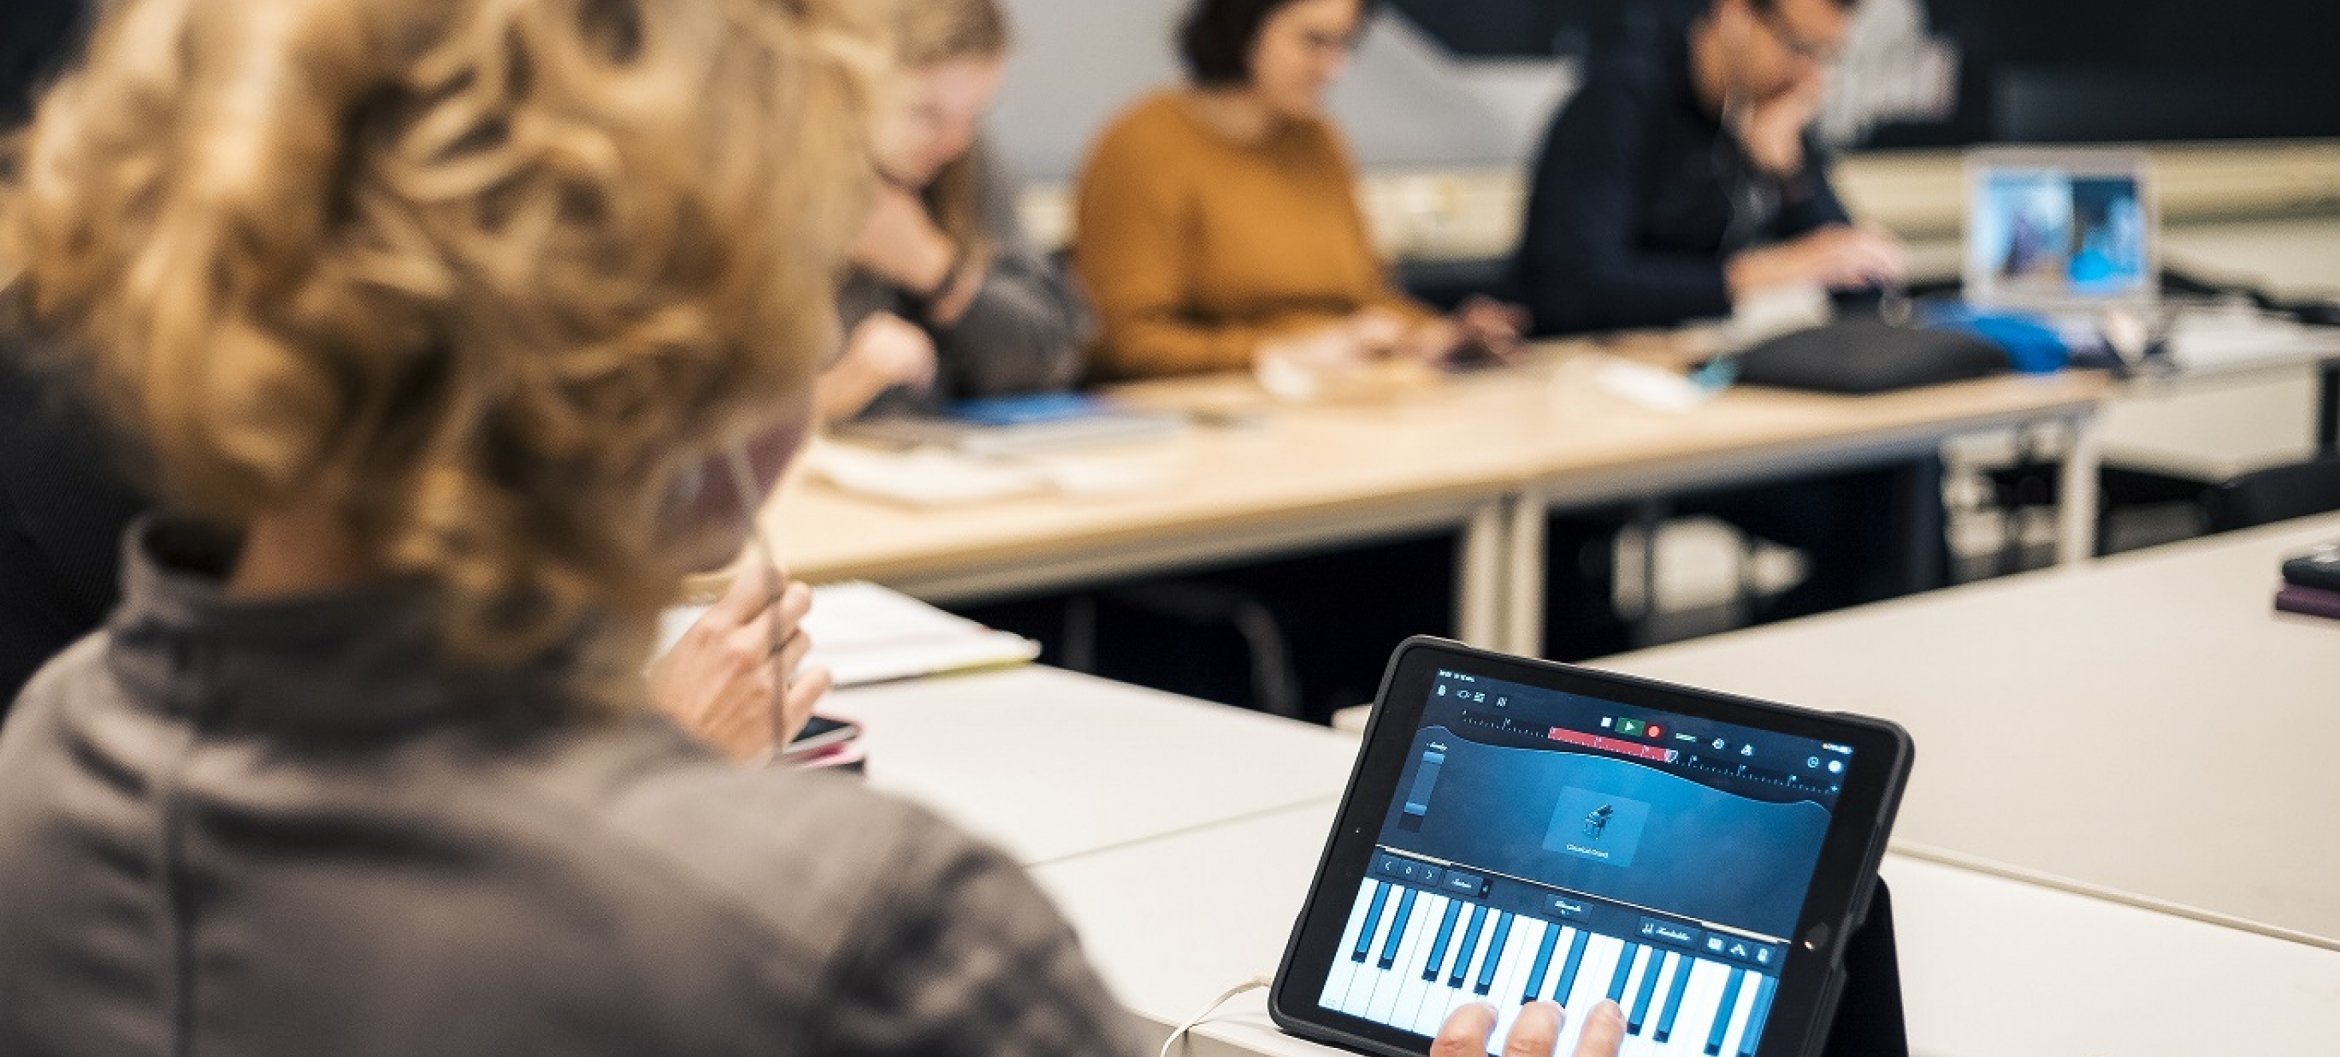 Master&#039;s students Music Therapy working with digital technologies.